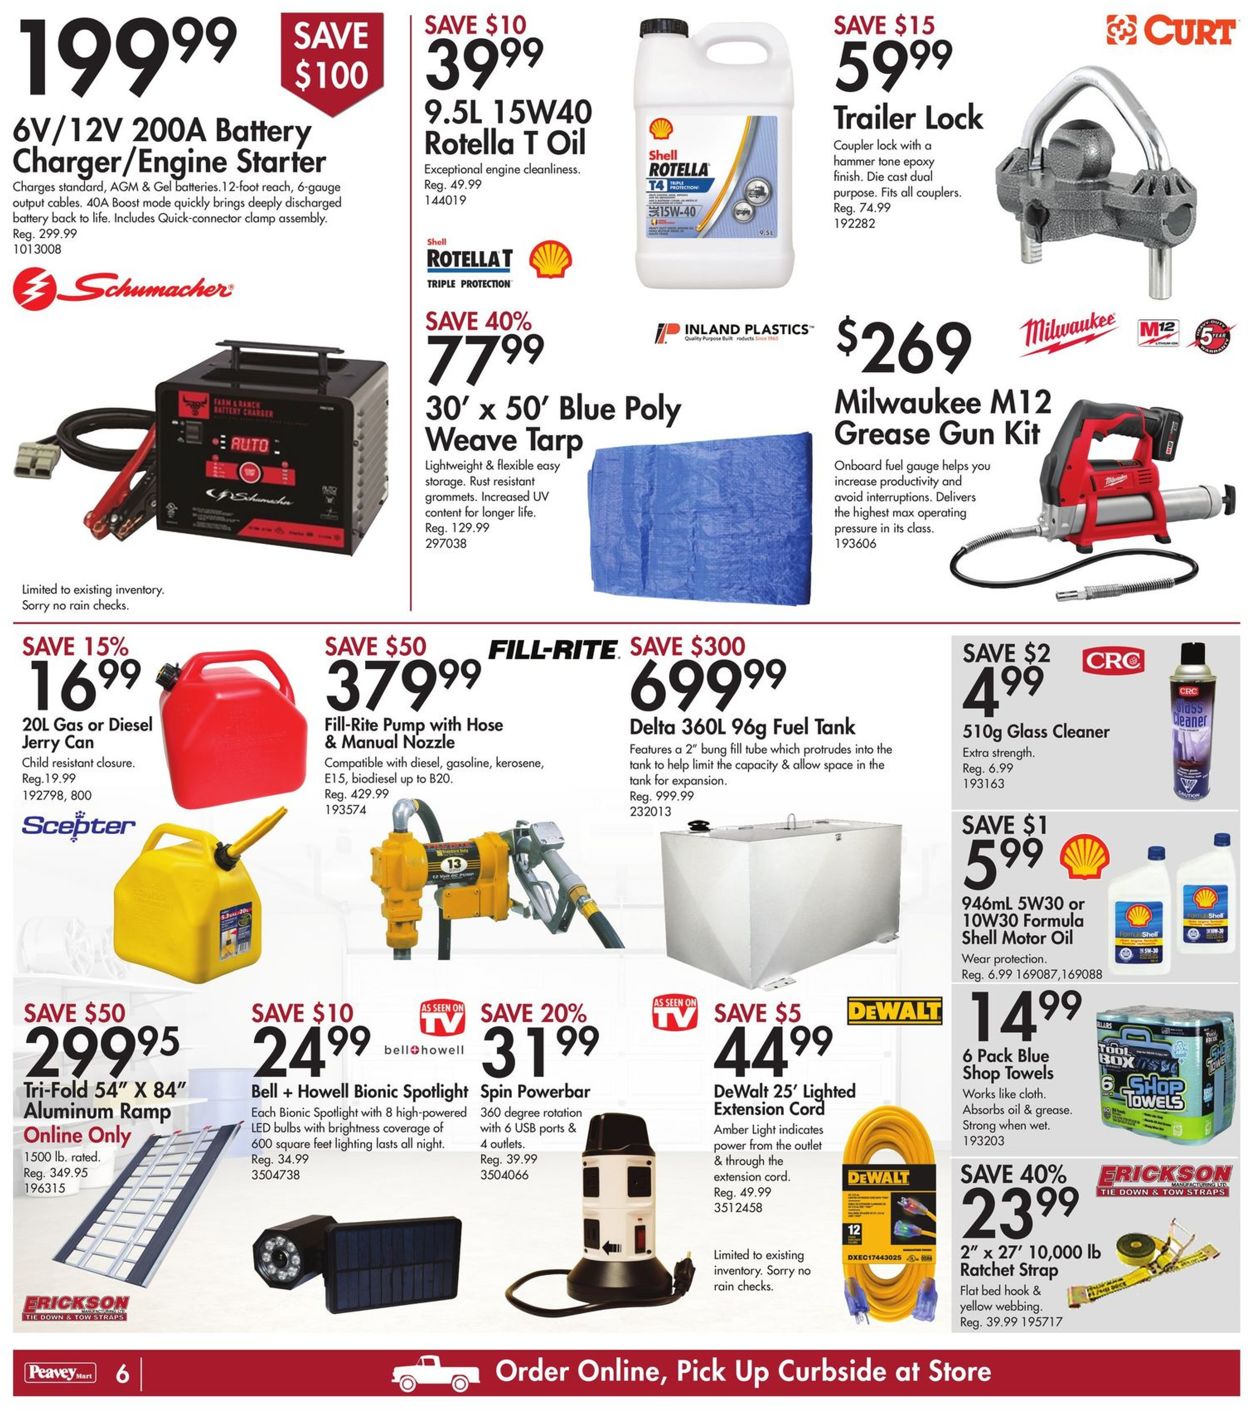 Peavey Mart Flyer from 01/15/2021